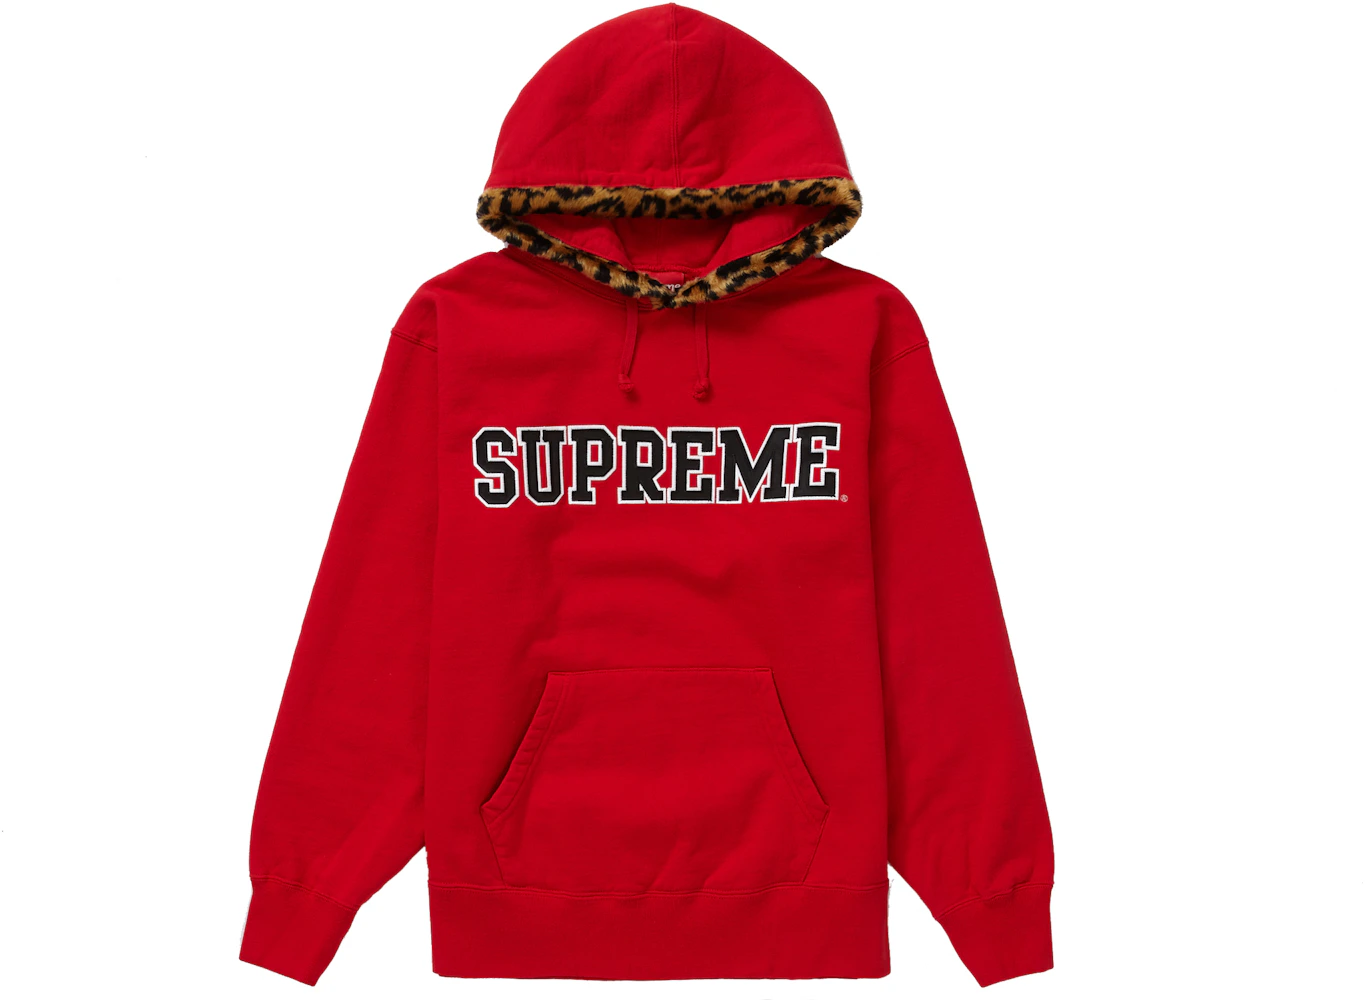 Supreme - Authenticated Sweatshirt - Cotton Red for Men, Very Good Condition